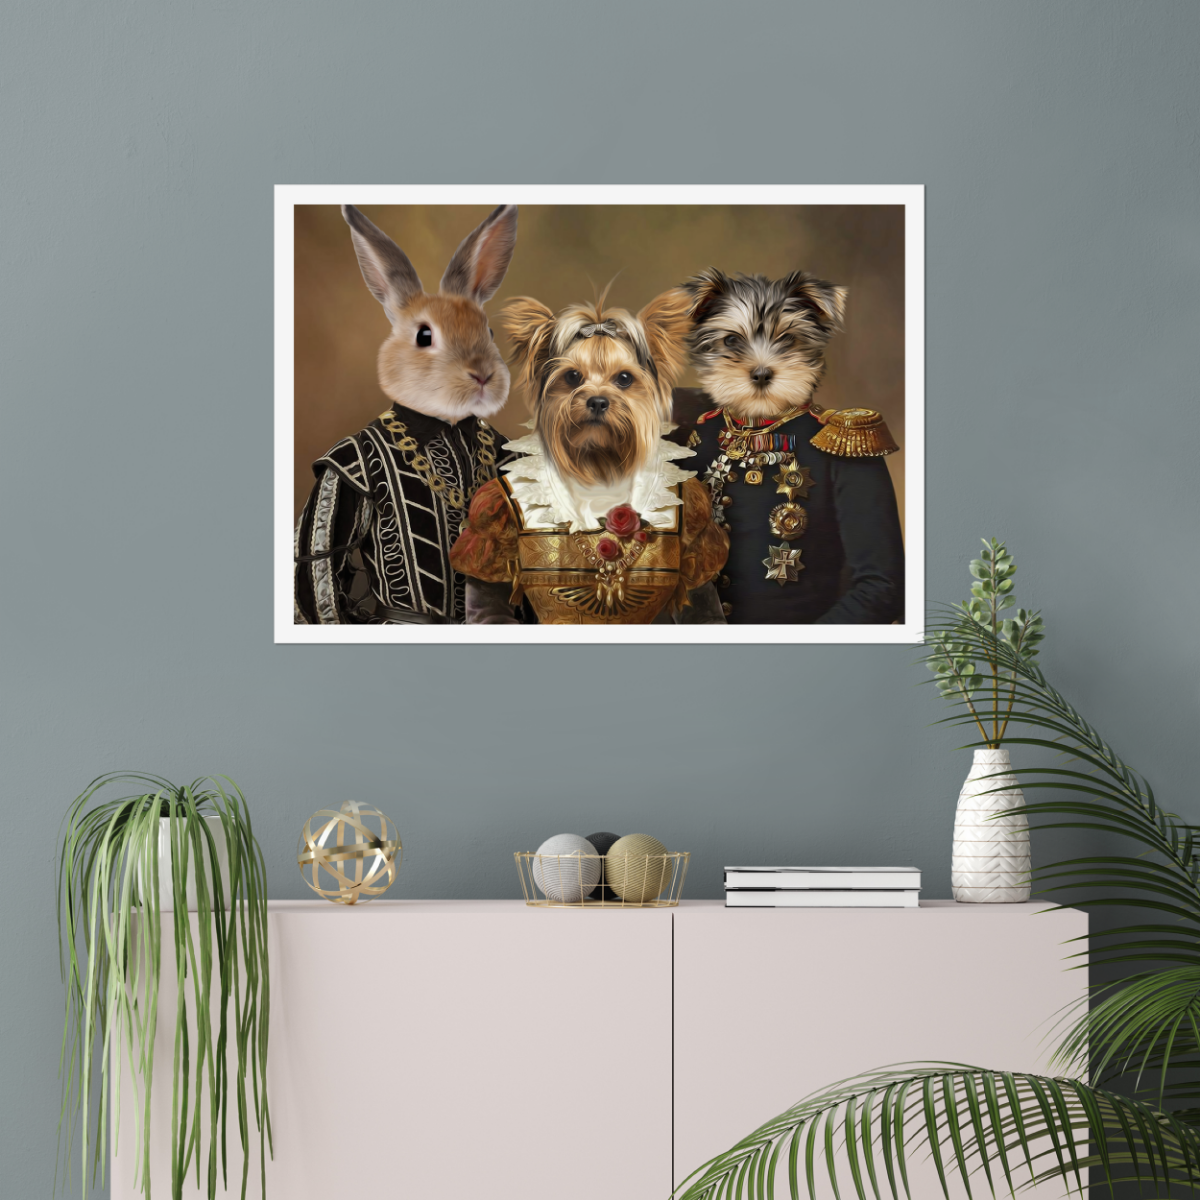 The Nobles: Custom Pet Poster - Paw & Glory - #pet portraits# - #dog portraits# - #pet portraits uk#Paw & Glory, paw and glory, pet portraits in oils, personalized pet and owner canvas, hogwarts dog houses, my pet painting, painting pets, aristocrat dog painting, pet portrait